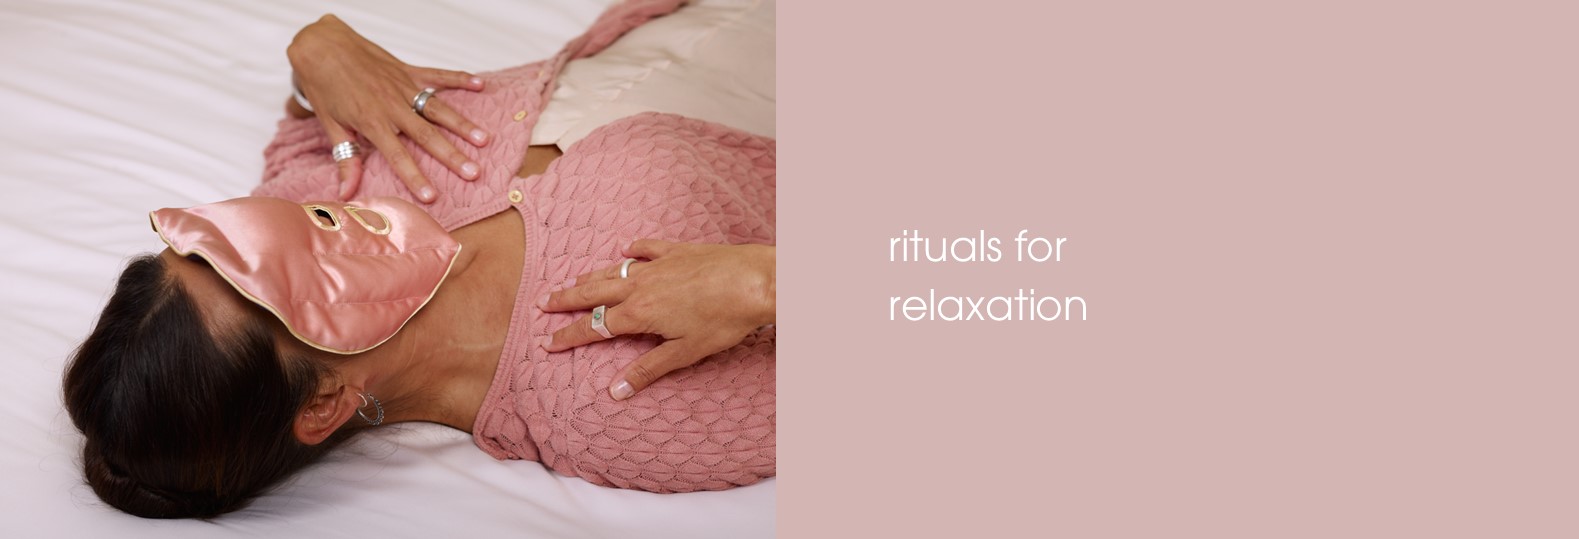 HOLISTIC SILK RETREAT RITUALS FOR RELAXATION